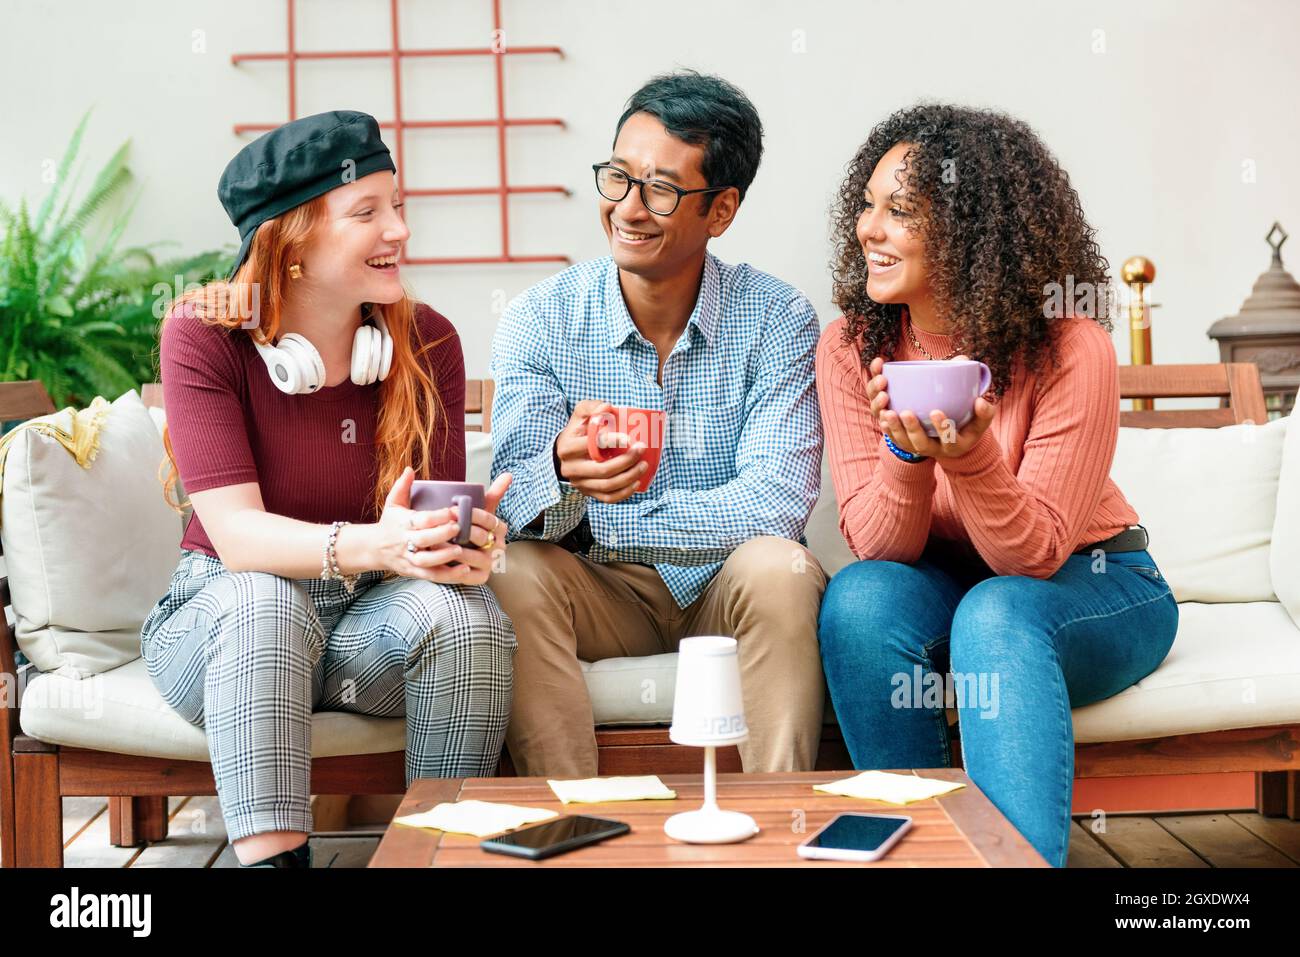 Three diverse young friends enjoying coffee together on a sofa laughing and smiling as they spend some quality time relaxing and chilling in a modern Stock Photo